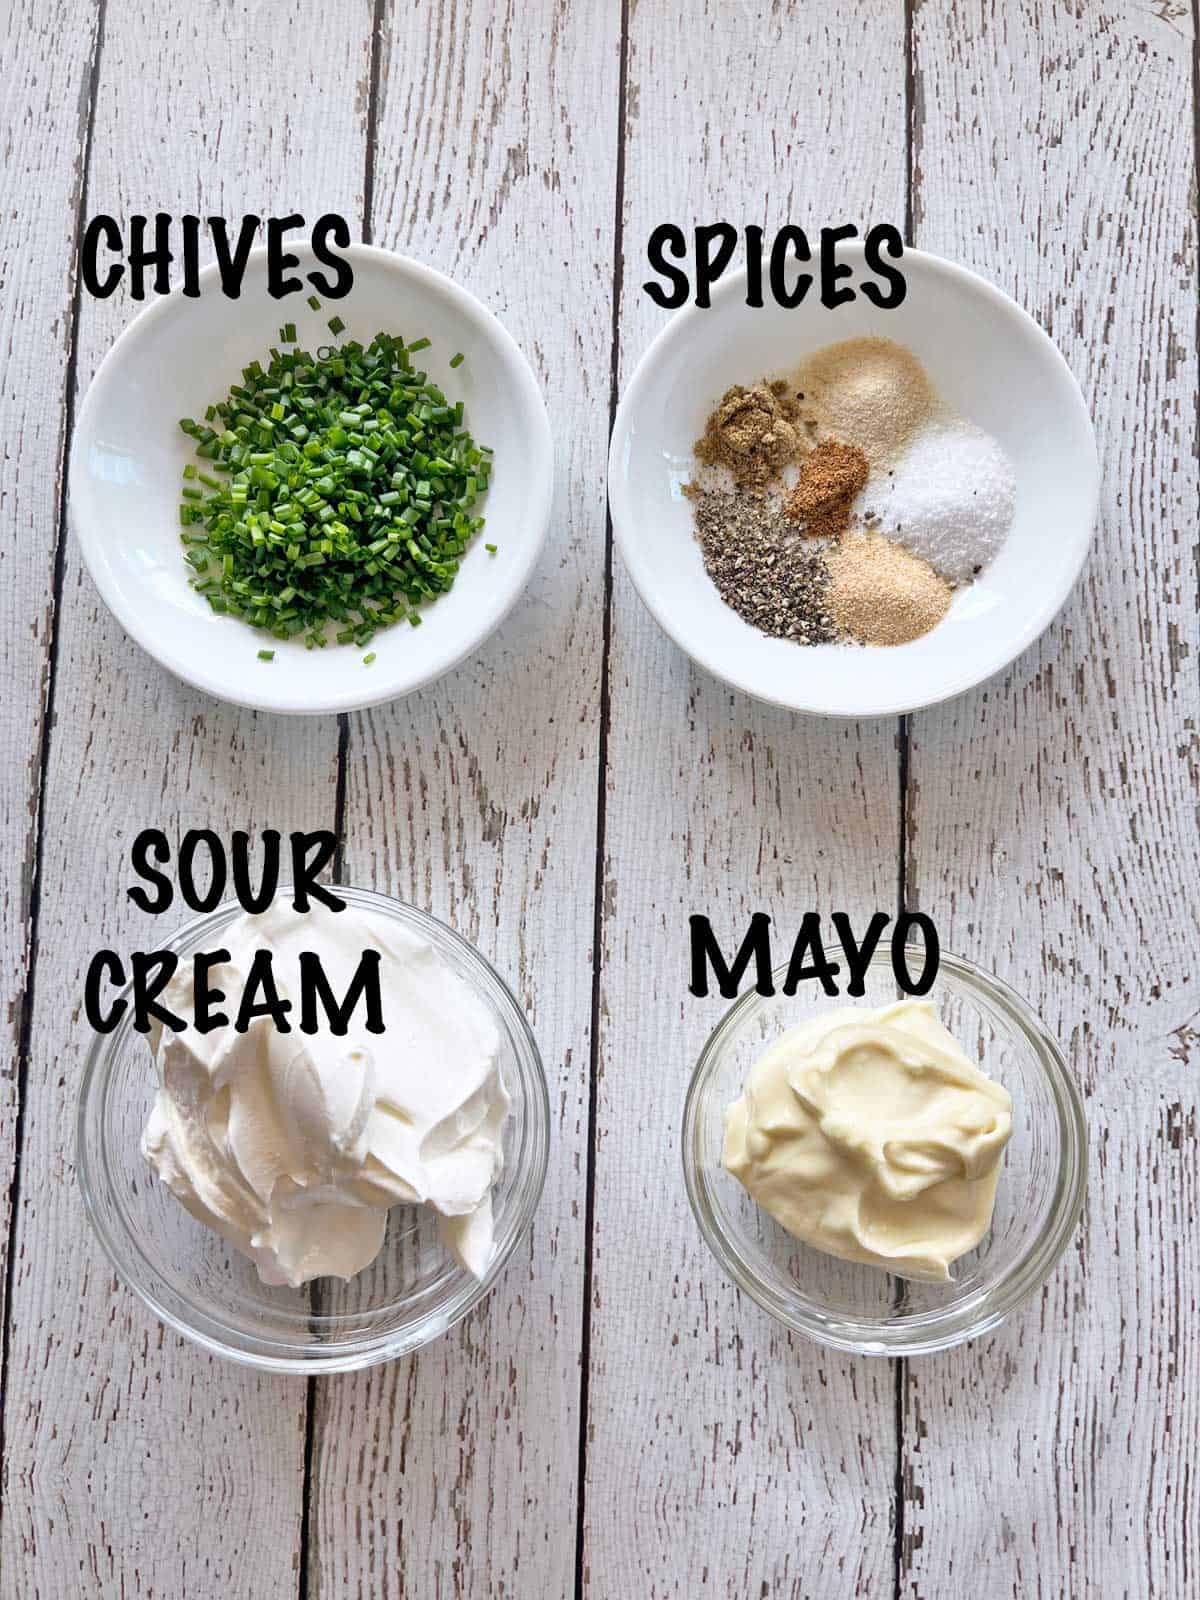 The ingredients needed to make a sour cream dip. 